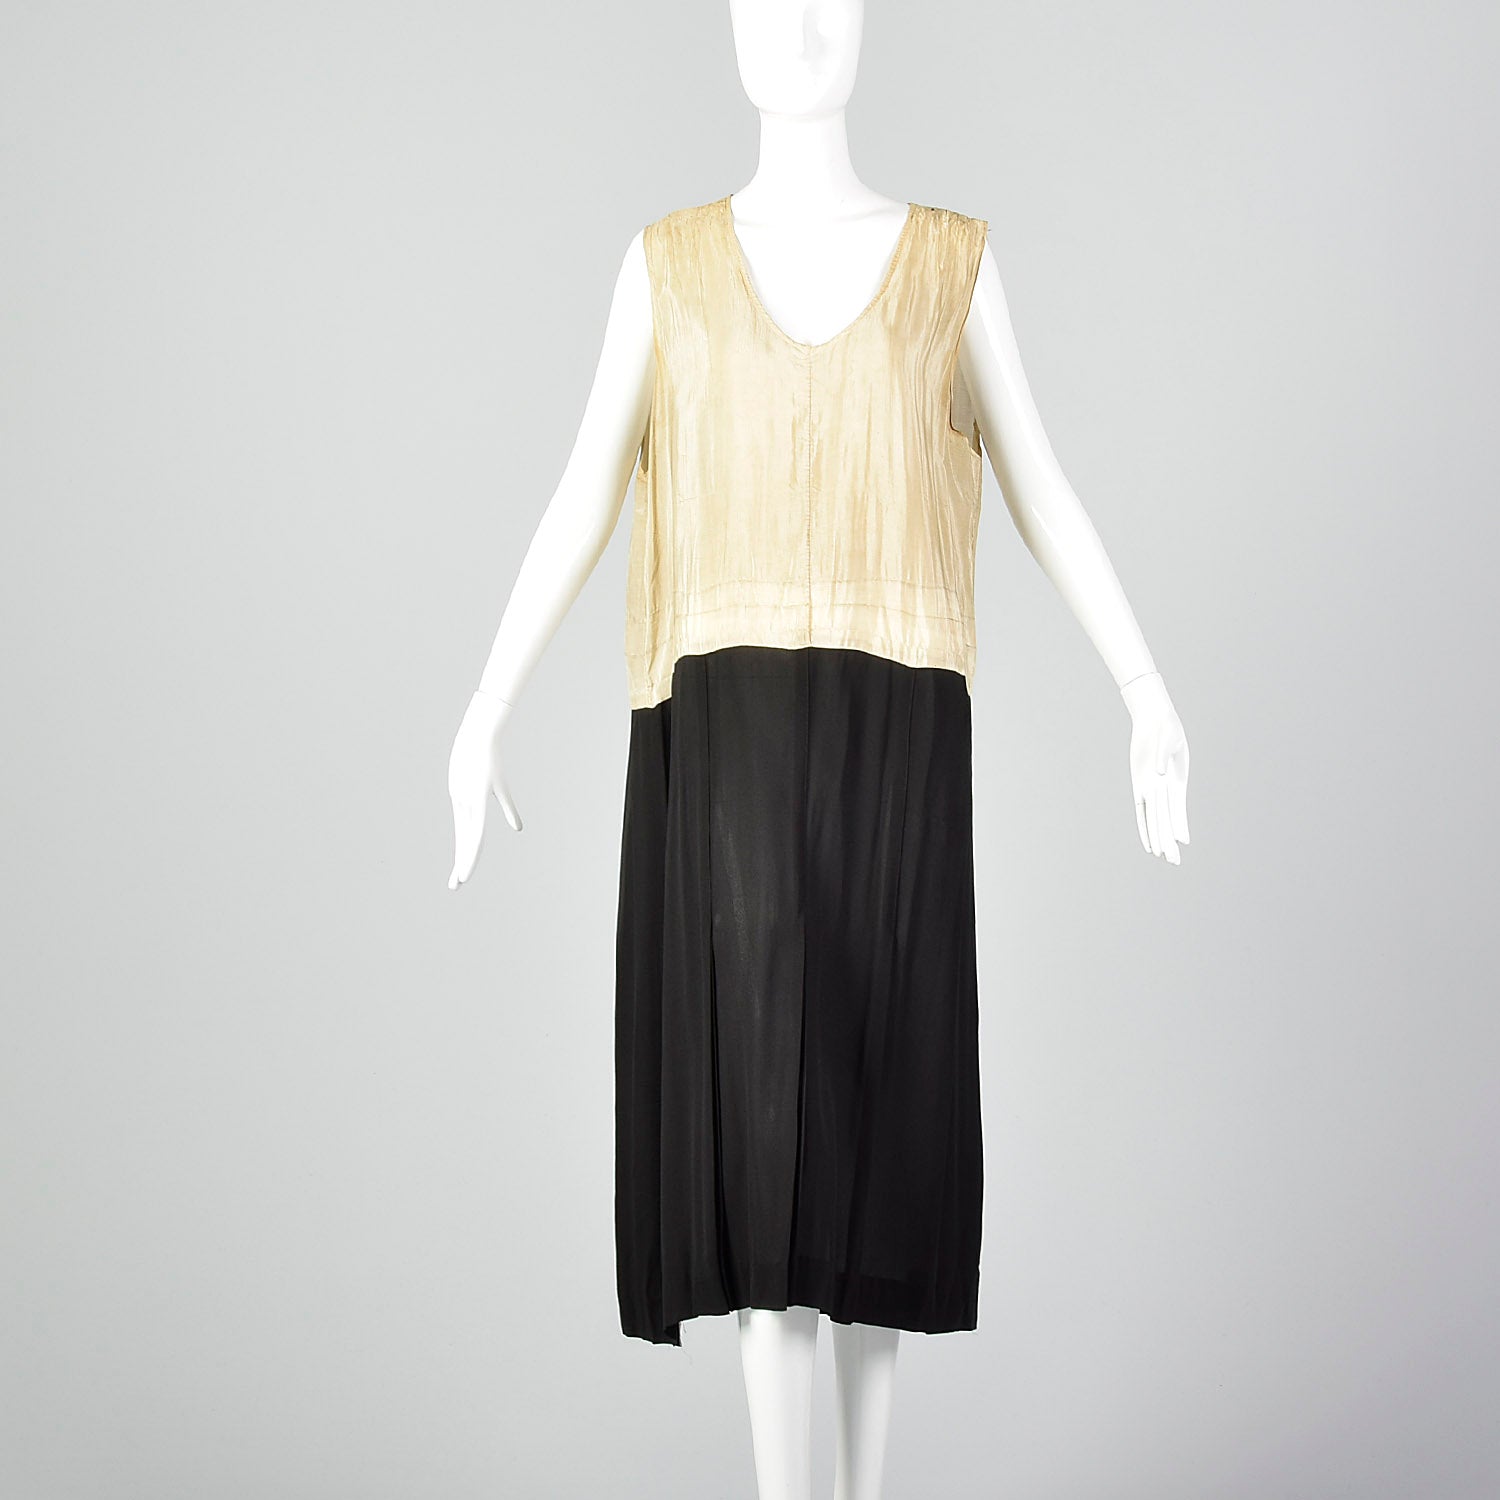 Large 1920s Dress and Wrap Top